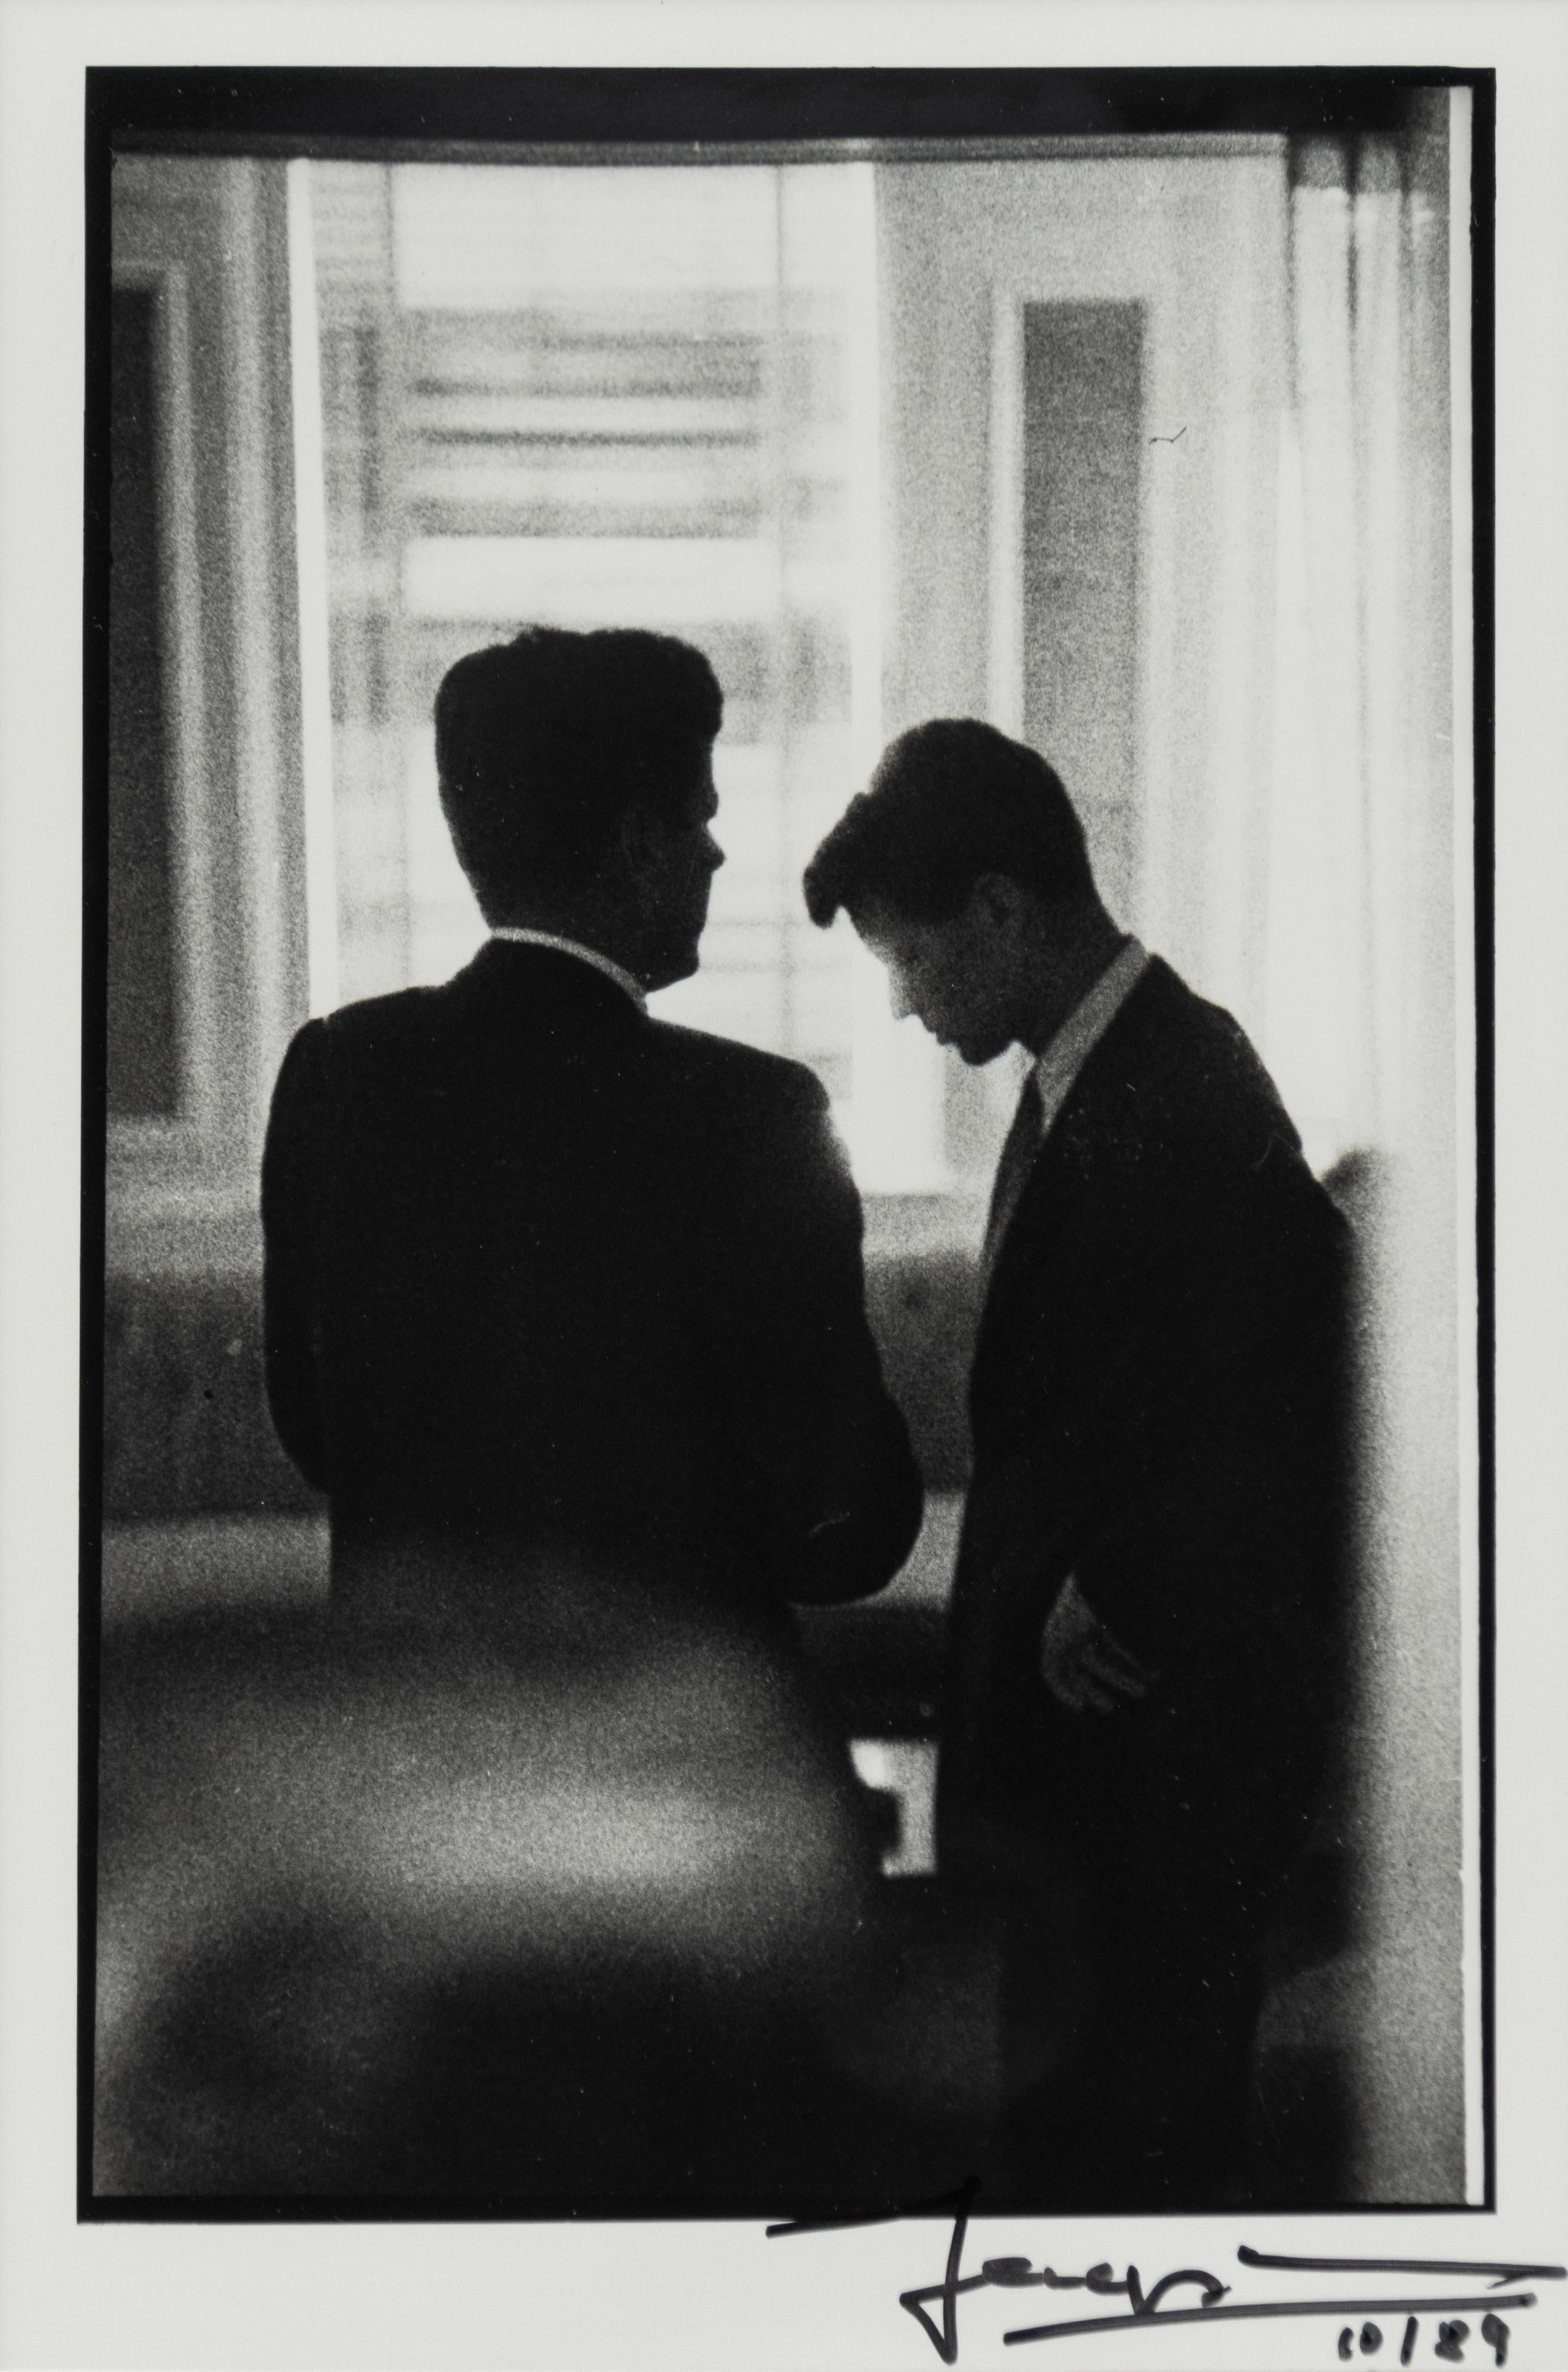 JFK with Bobby Kennedy, Biltmore Hotel, Los Angeles, July 14, 1960 - Photograph by Jacques Lowe